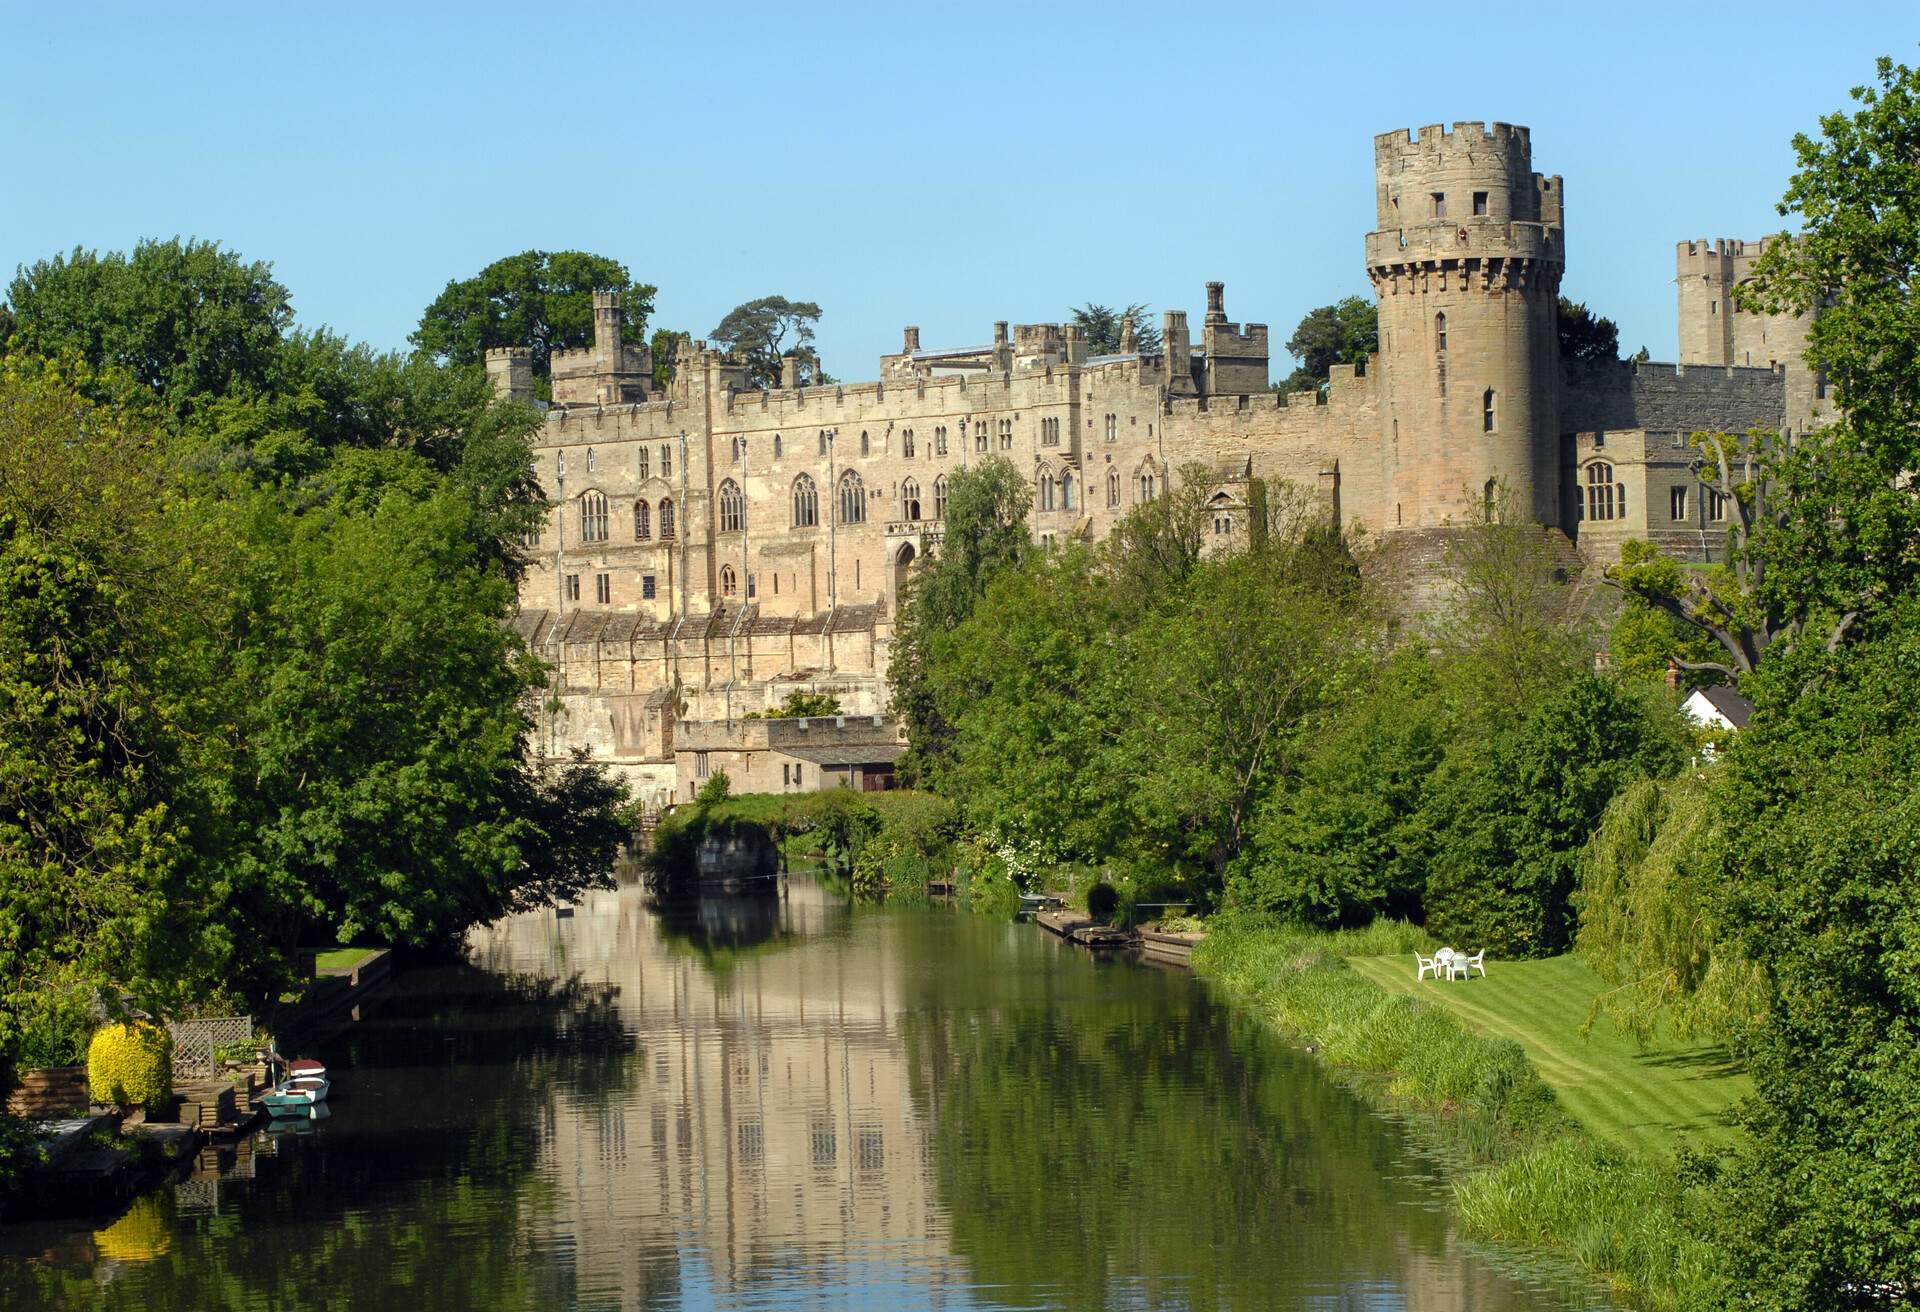 Warwick Castle reflected in the river on a beautiful spring morning.